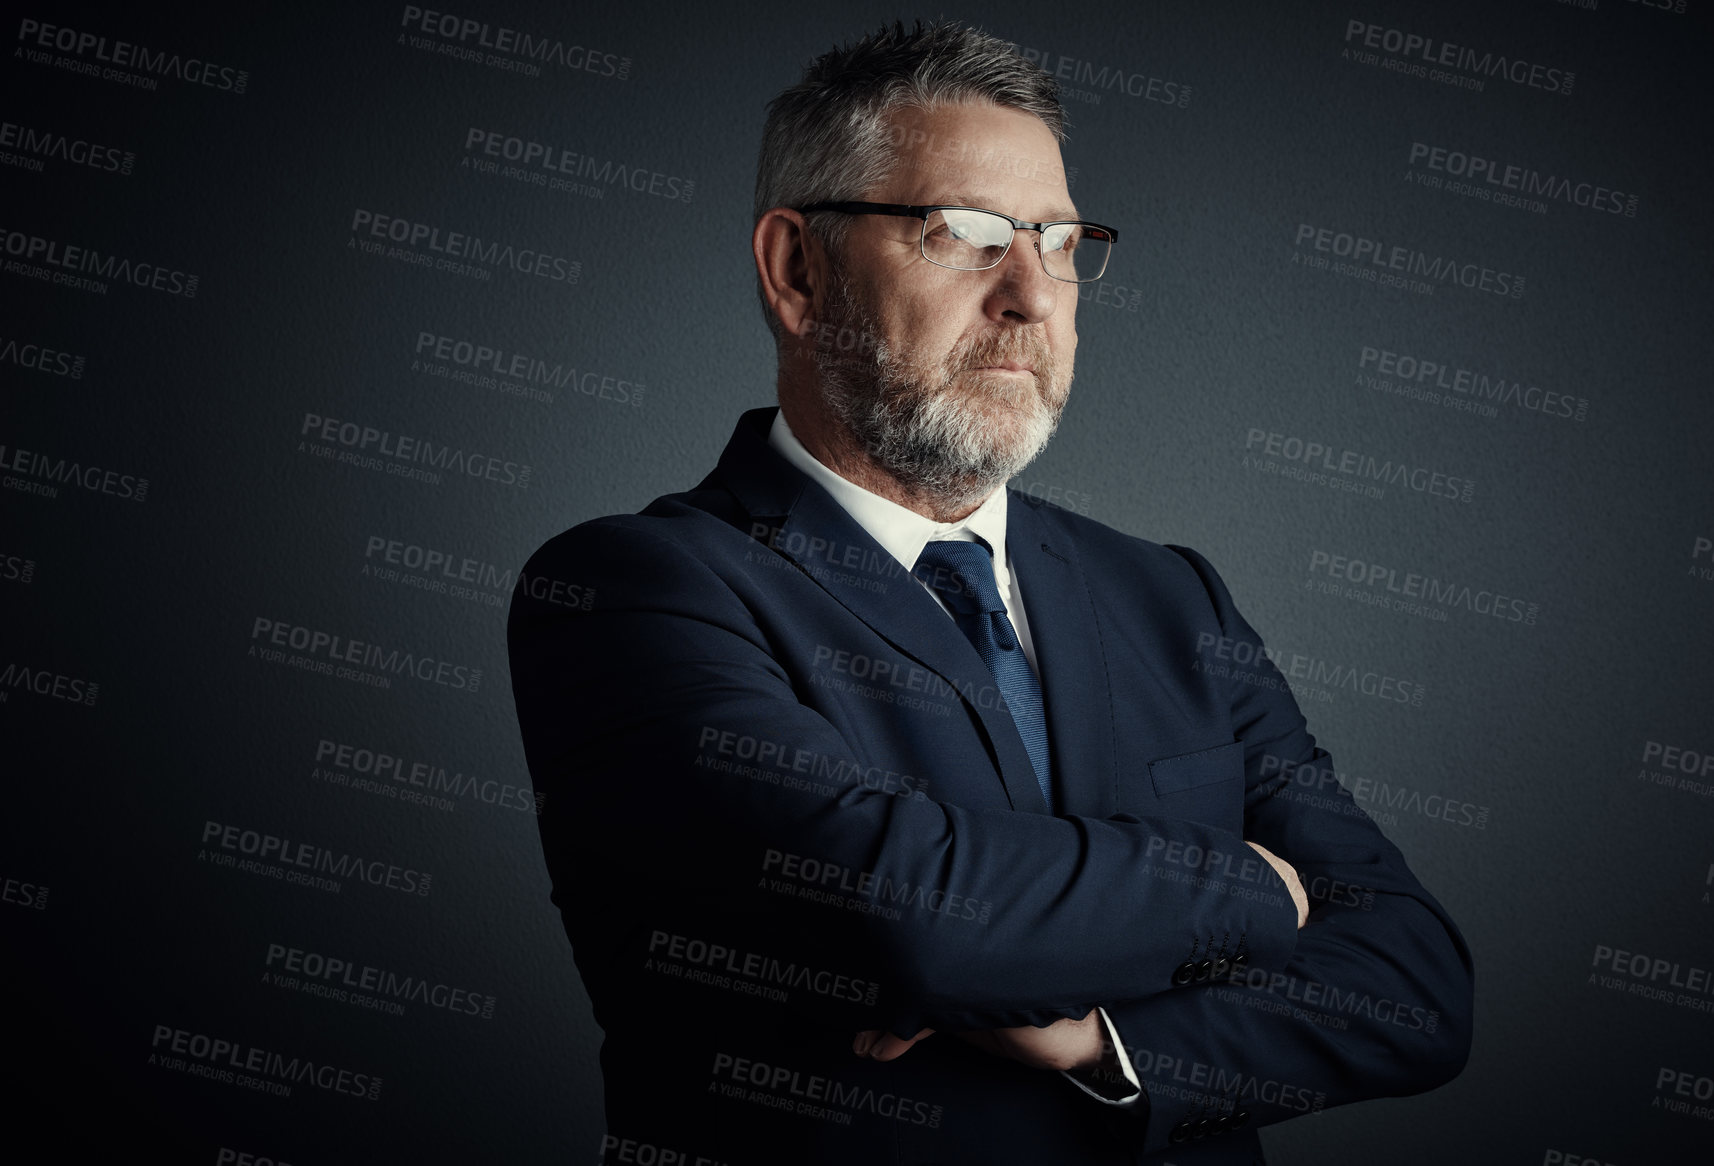 Buy stock photo Studio shot of a handsome mature businessman looking thoughtful while standing with his arms folded against a dark background